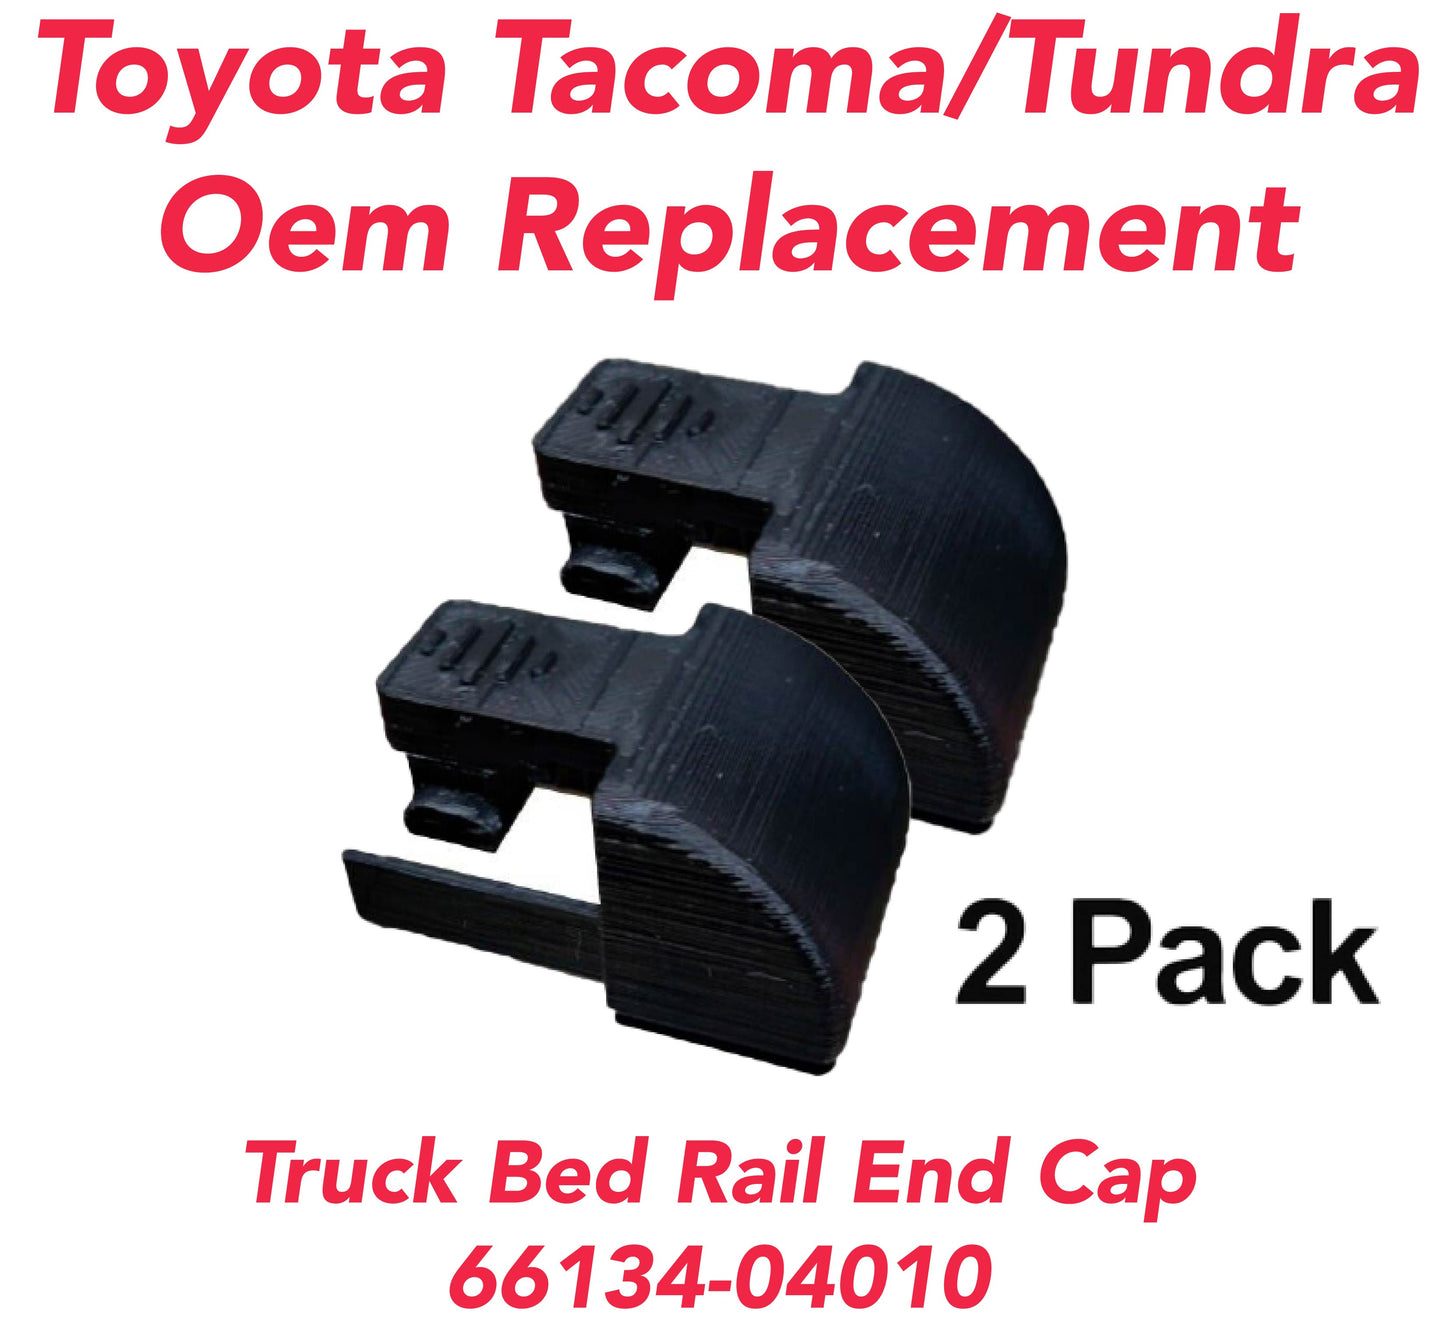 2 Pack Replacement Toyota Tacoma/Tundra Bed Rail End Cap Model: 66134-04010